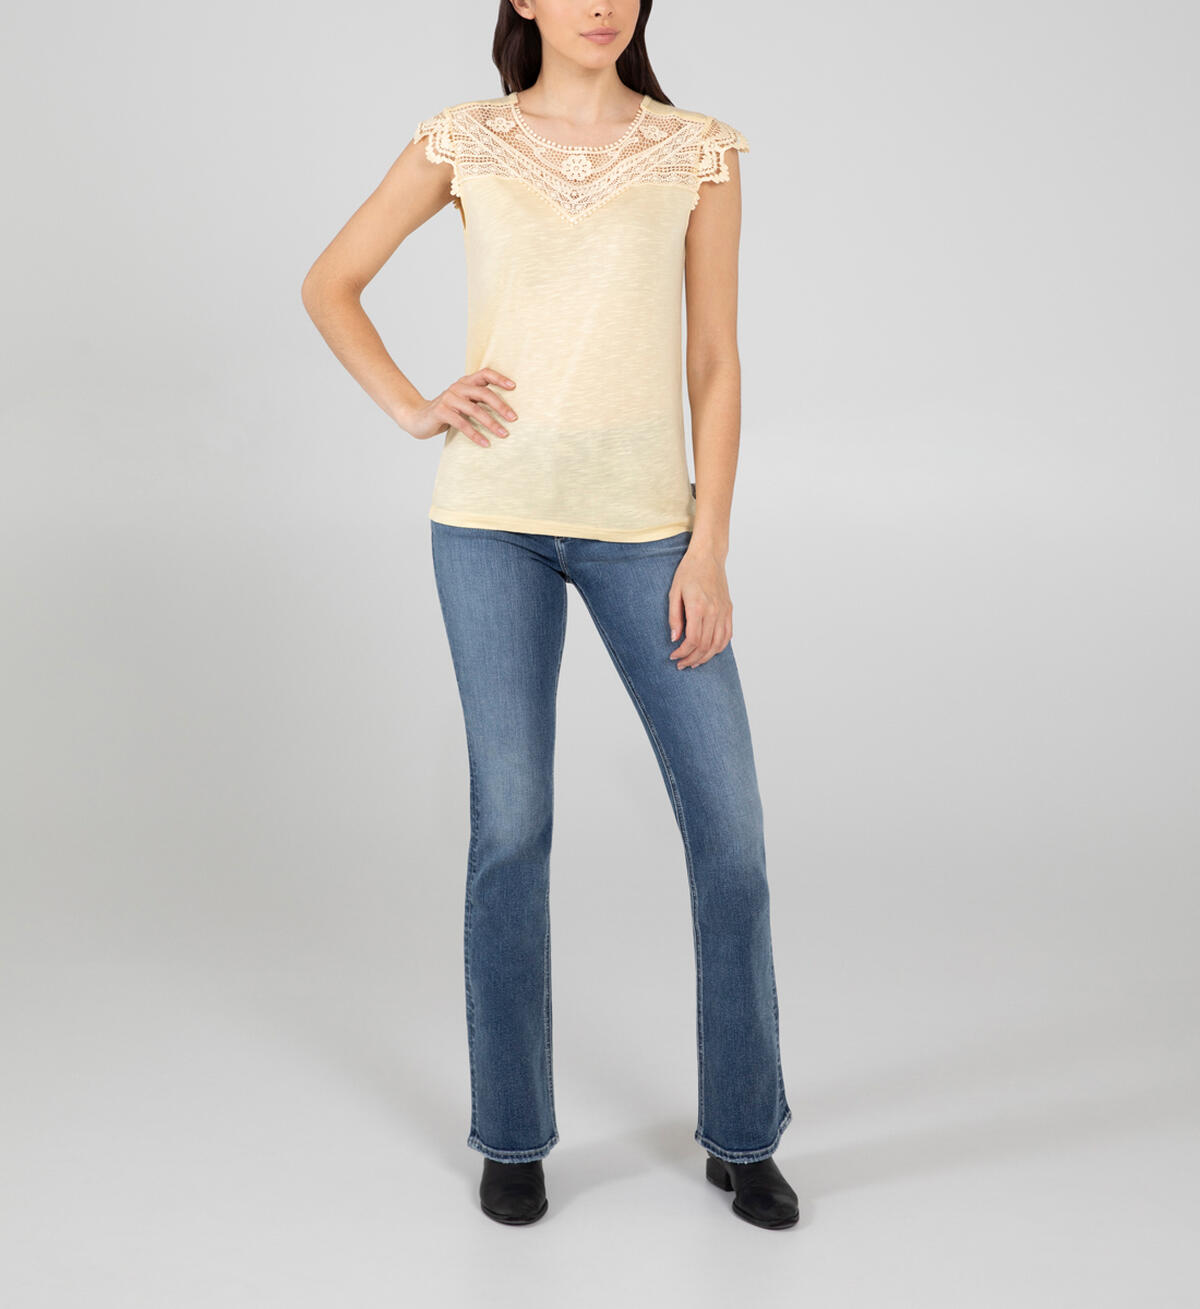 Sleeveless Top  With Crochet Lace Detail, , hi-res image number 0